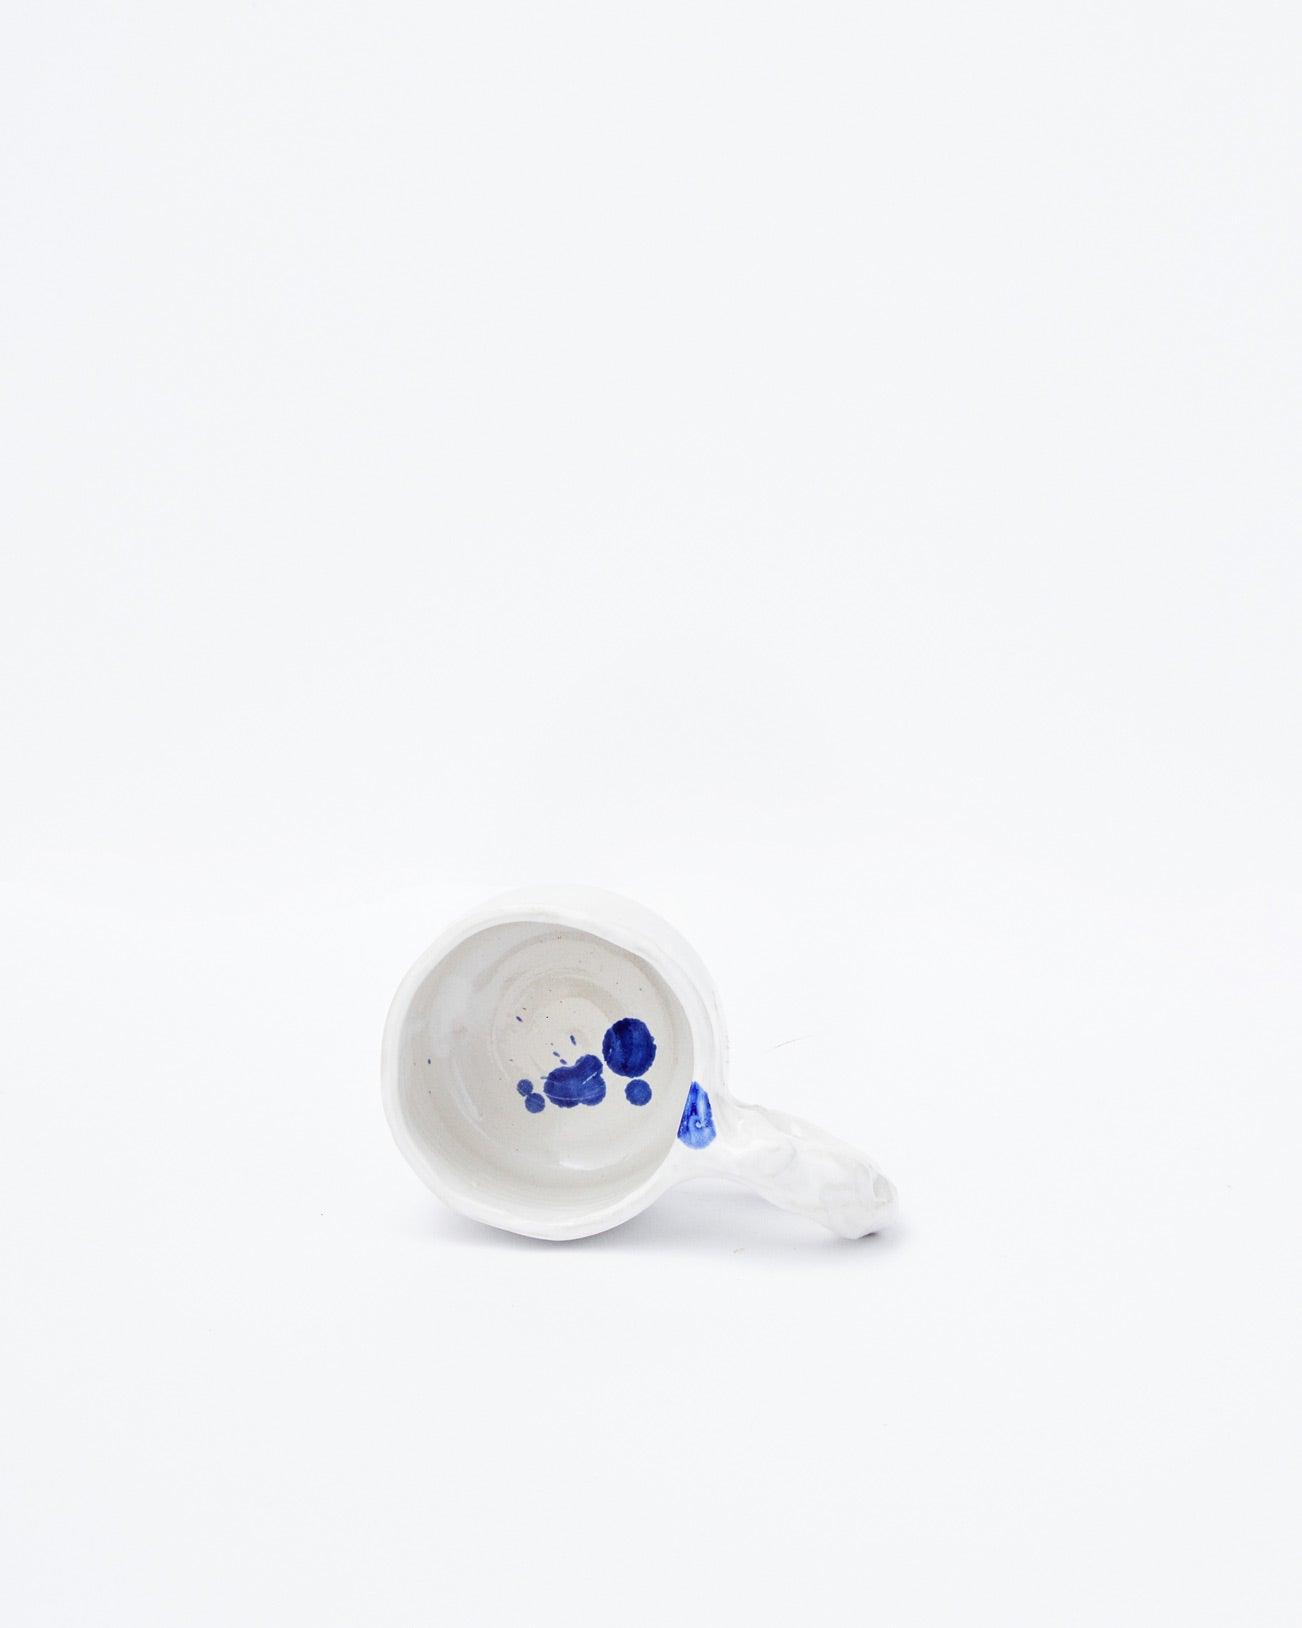 White background, white modern ceramic cup with lying handle